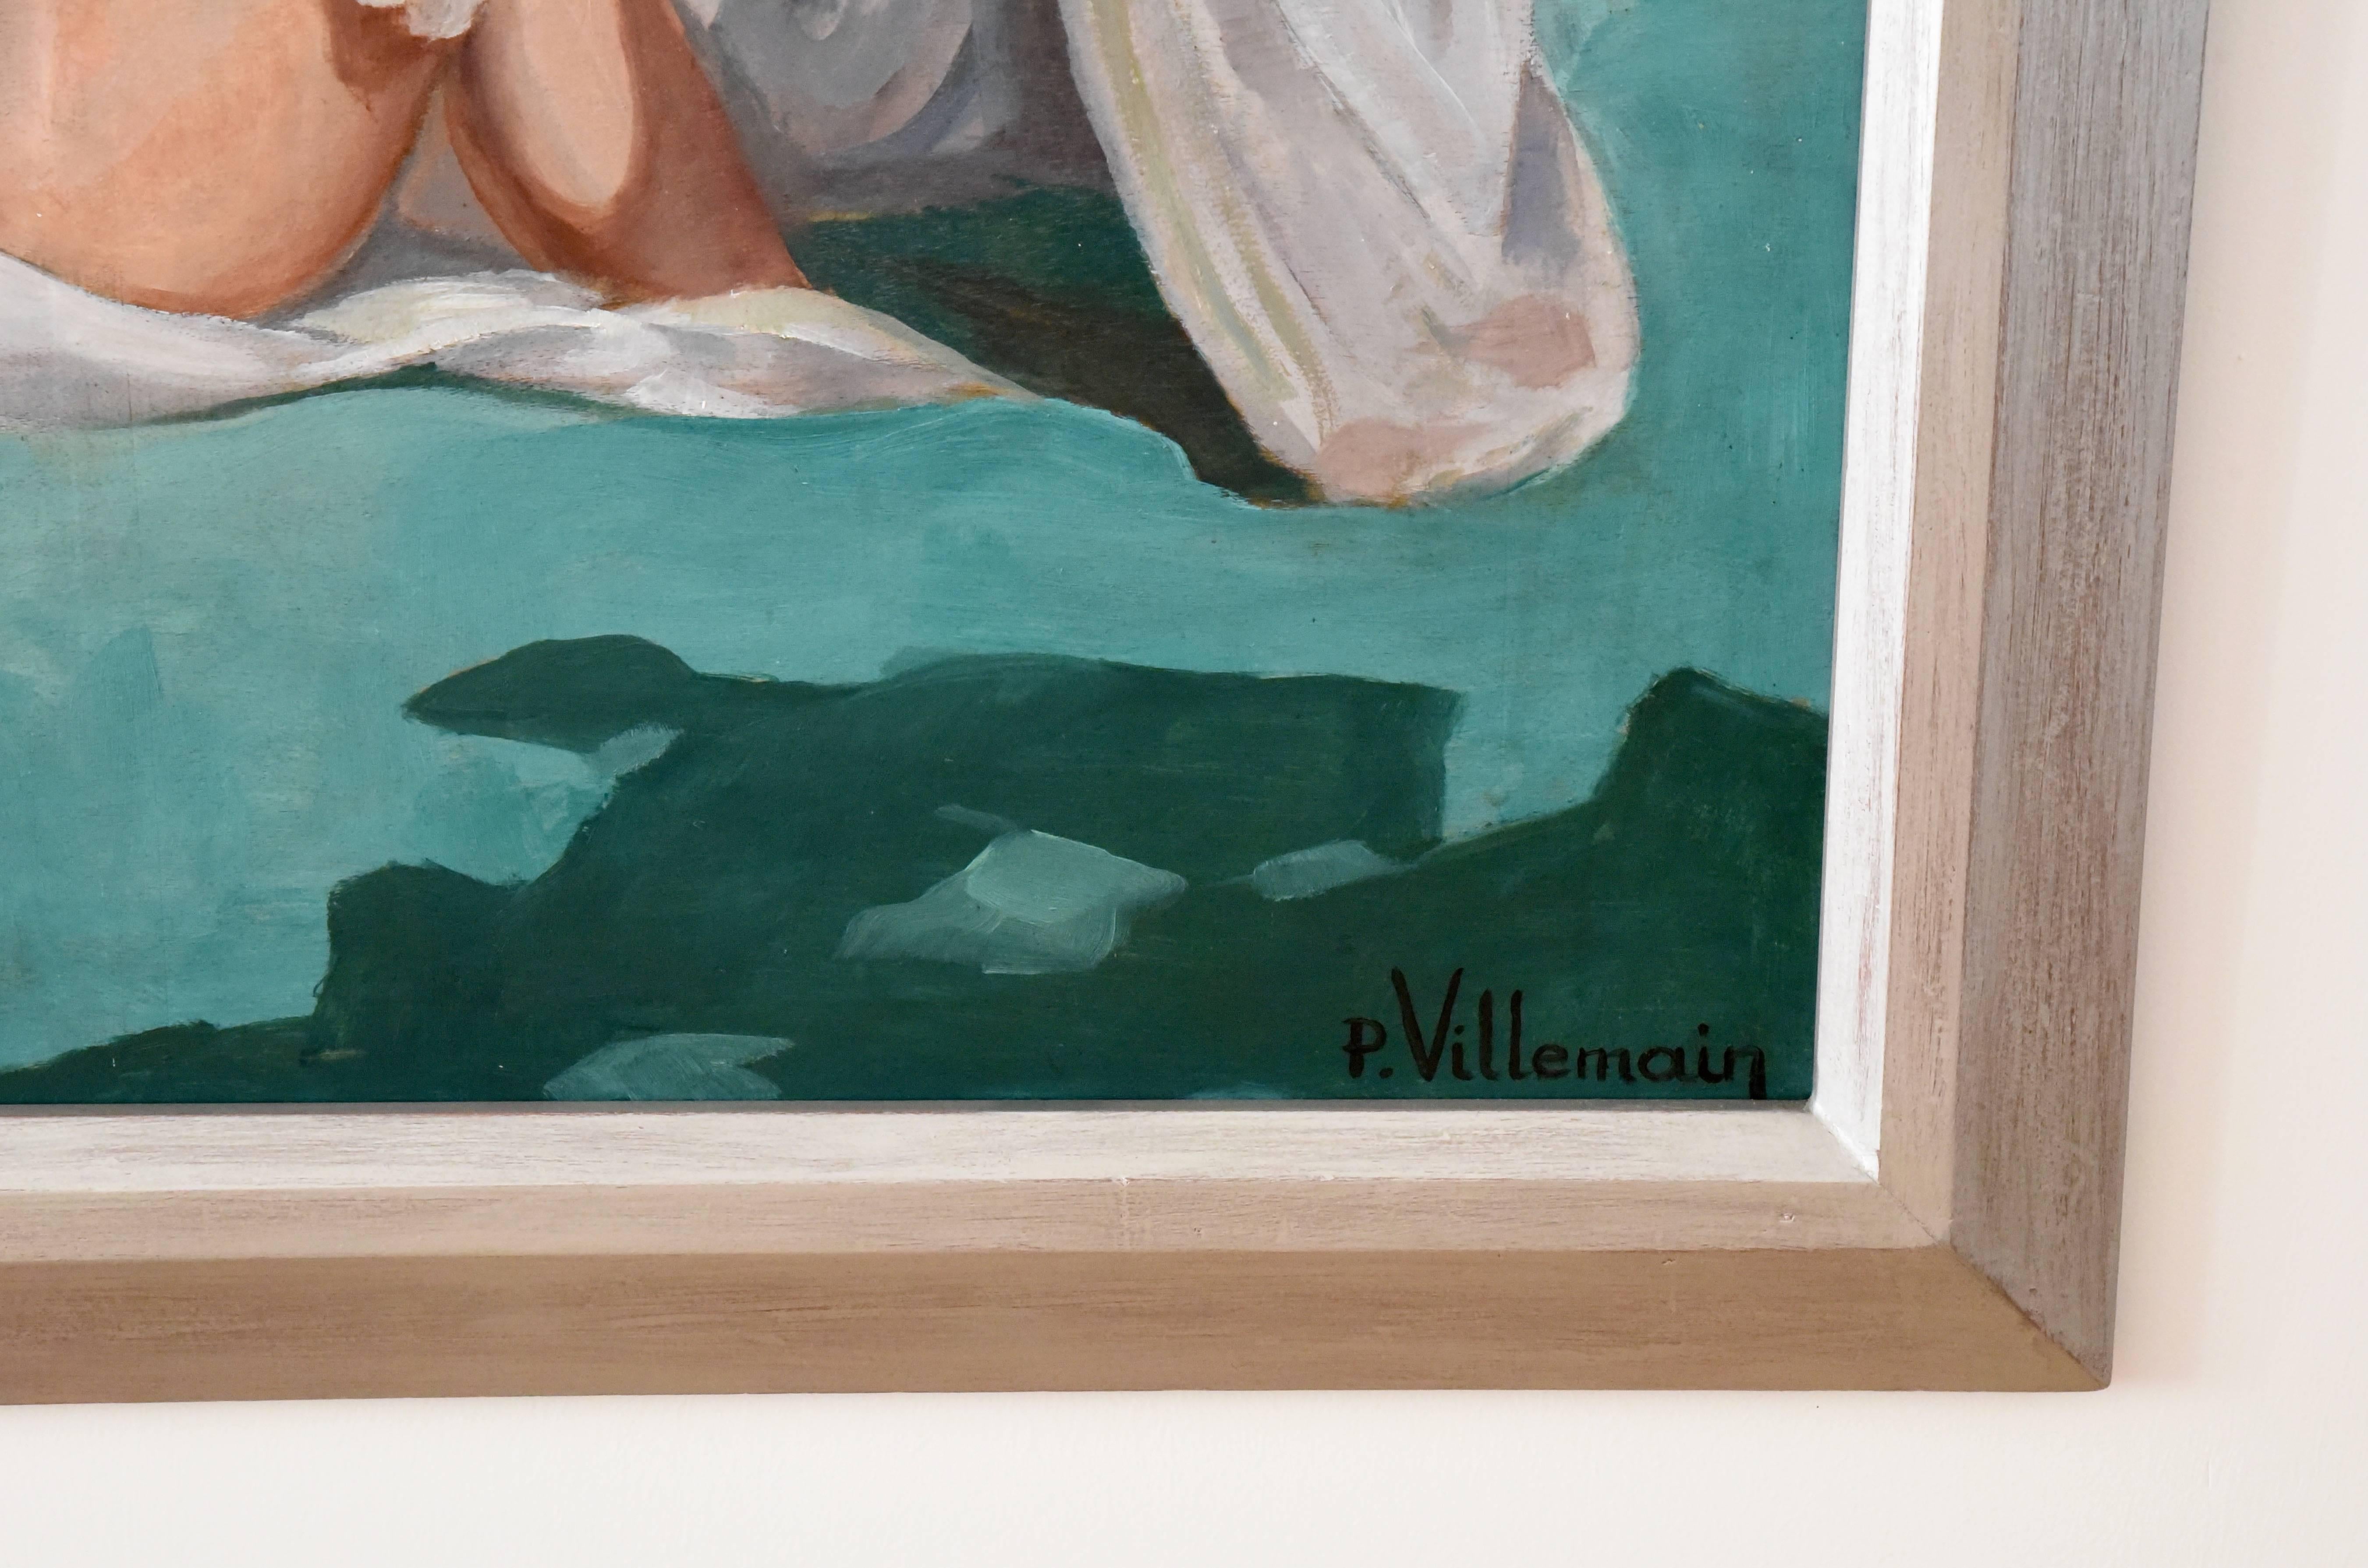 Beautiful large French Art Deco painting with three bathing nudes under a tree.
The standing nude is holding a blue drape.
Original wooden frame with silver patina.
Artist/ maker: P. Villemain
Signature/ marks: P. Villemain 1931
Style: Art